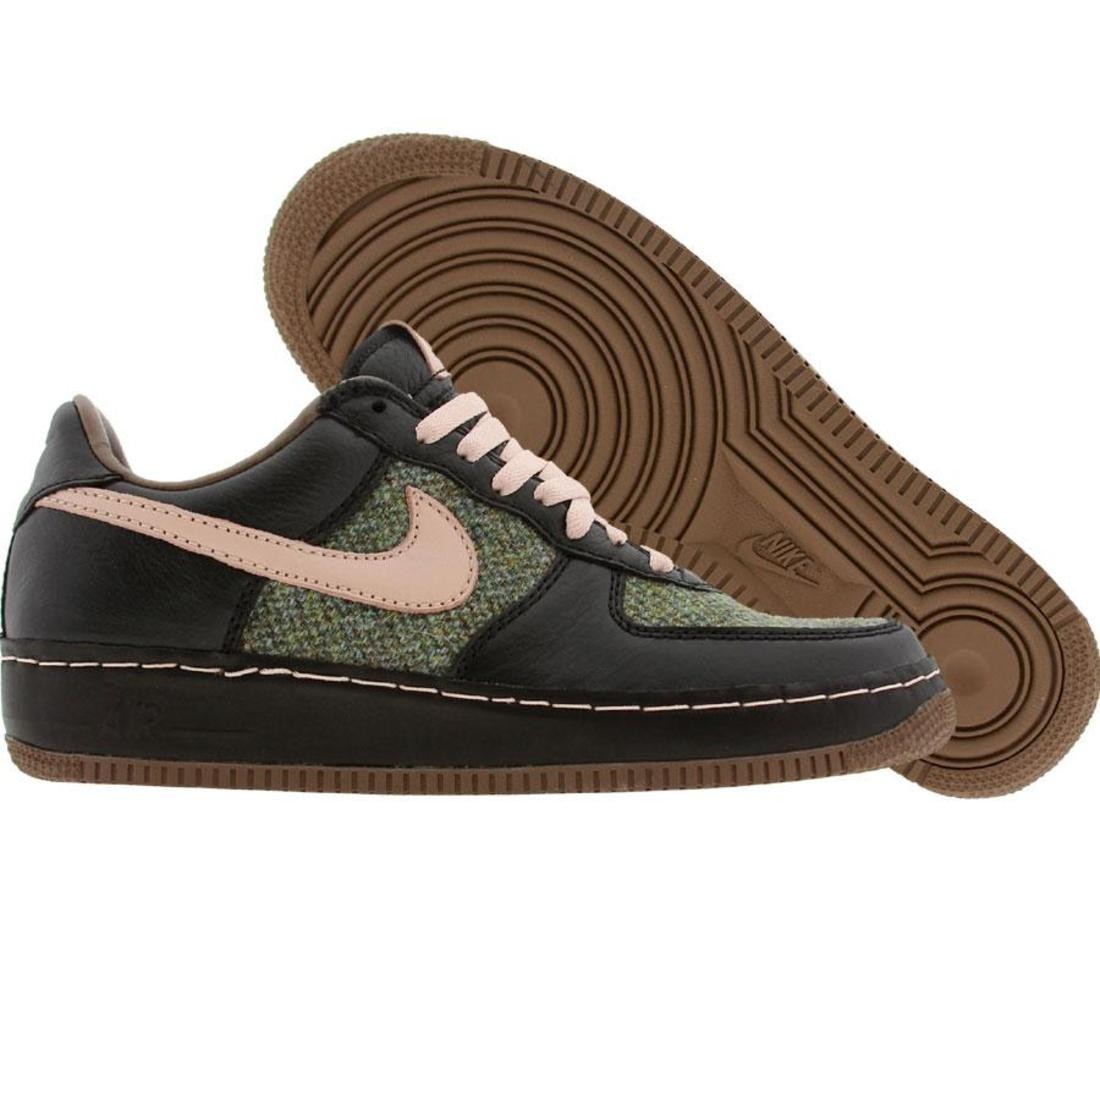 Nike Air Force 1 Low Insideout Harris Tweed Edition (black / cameo rose / classic olive)